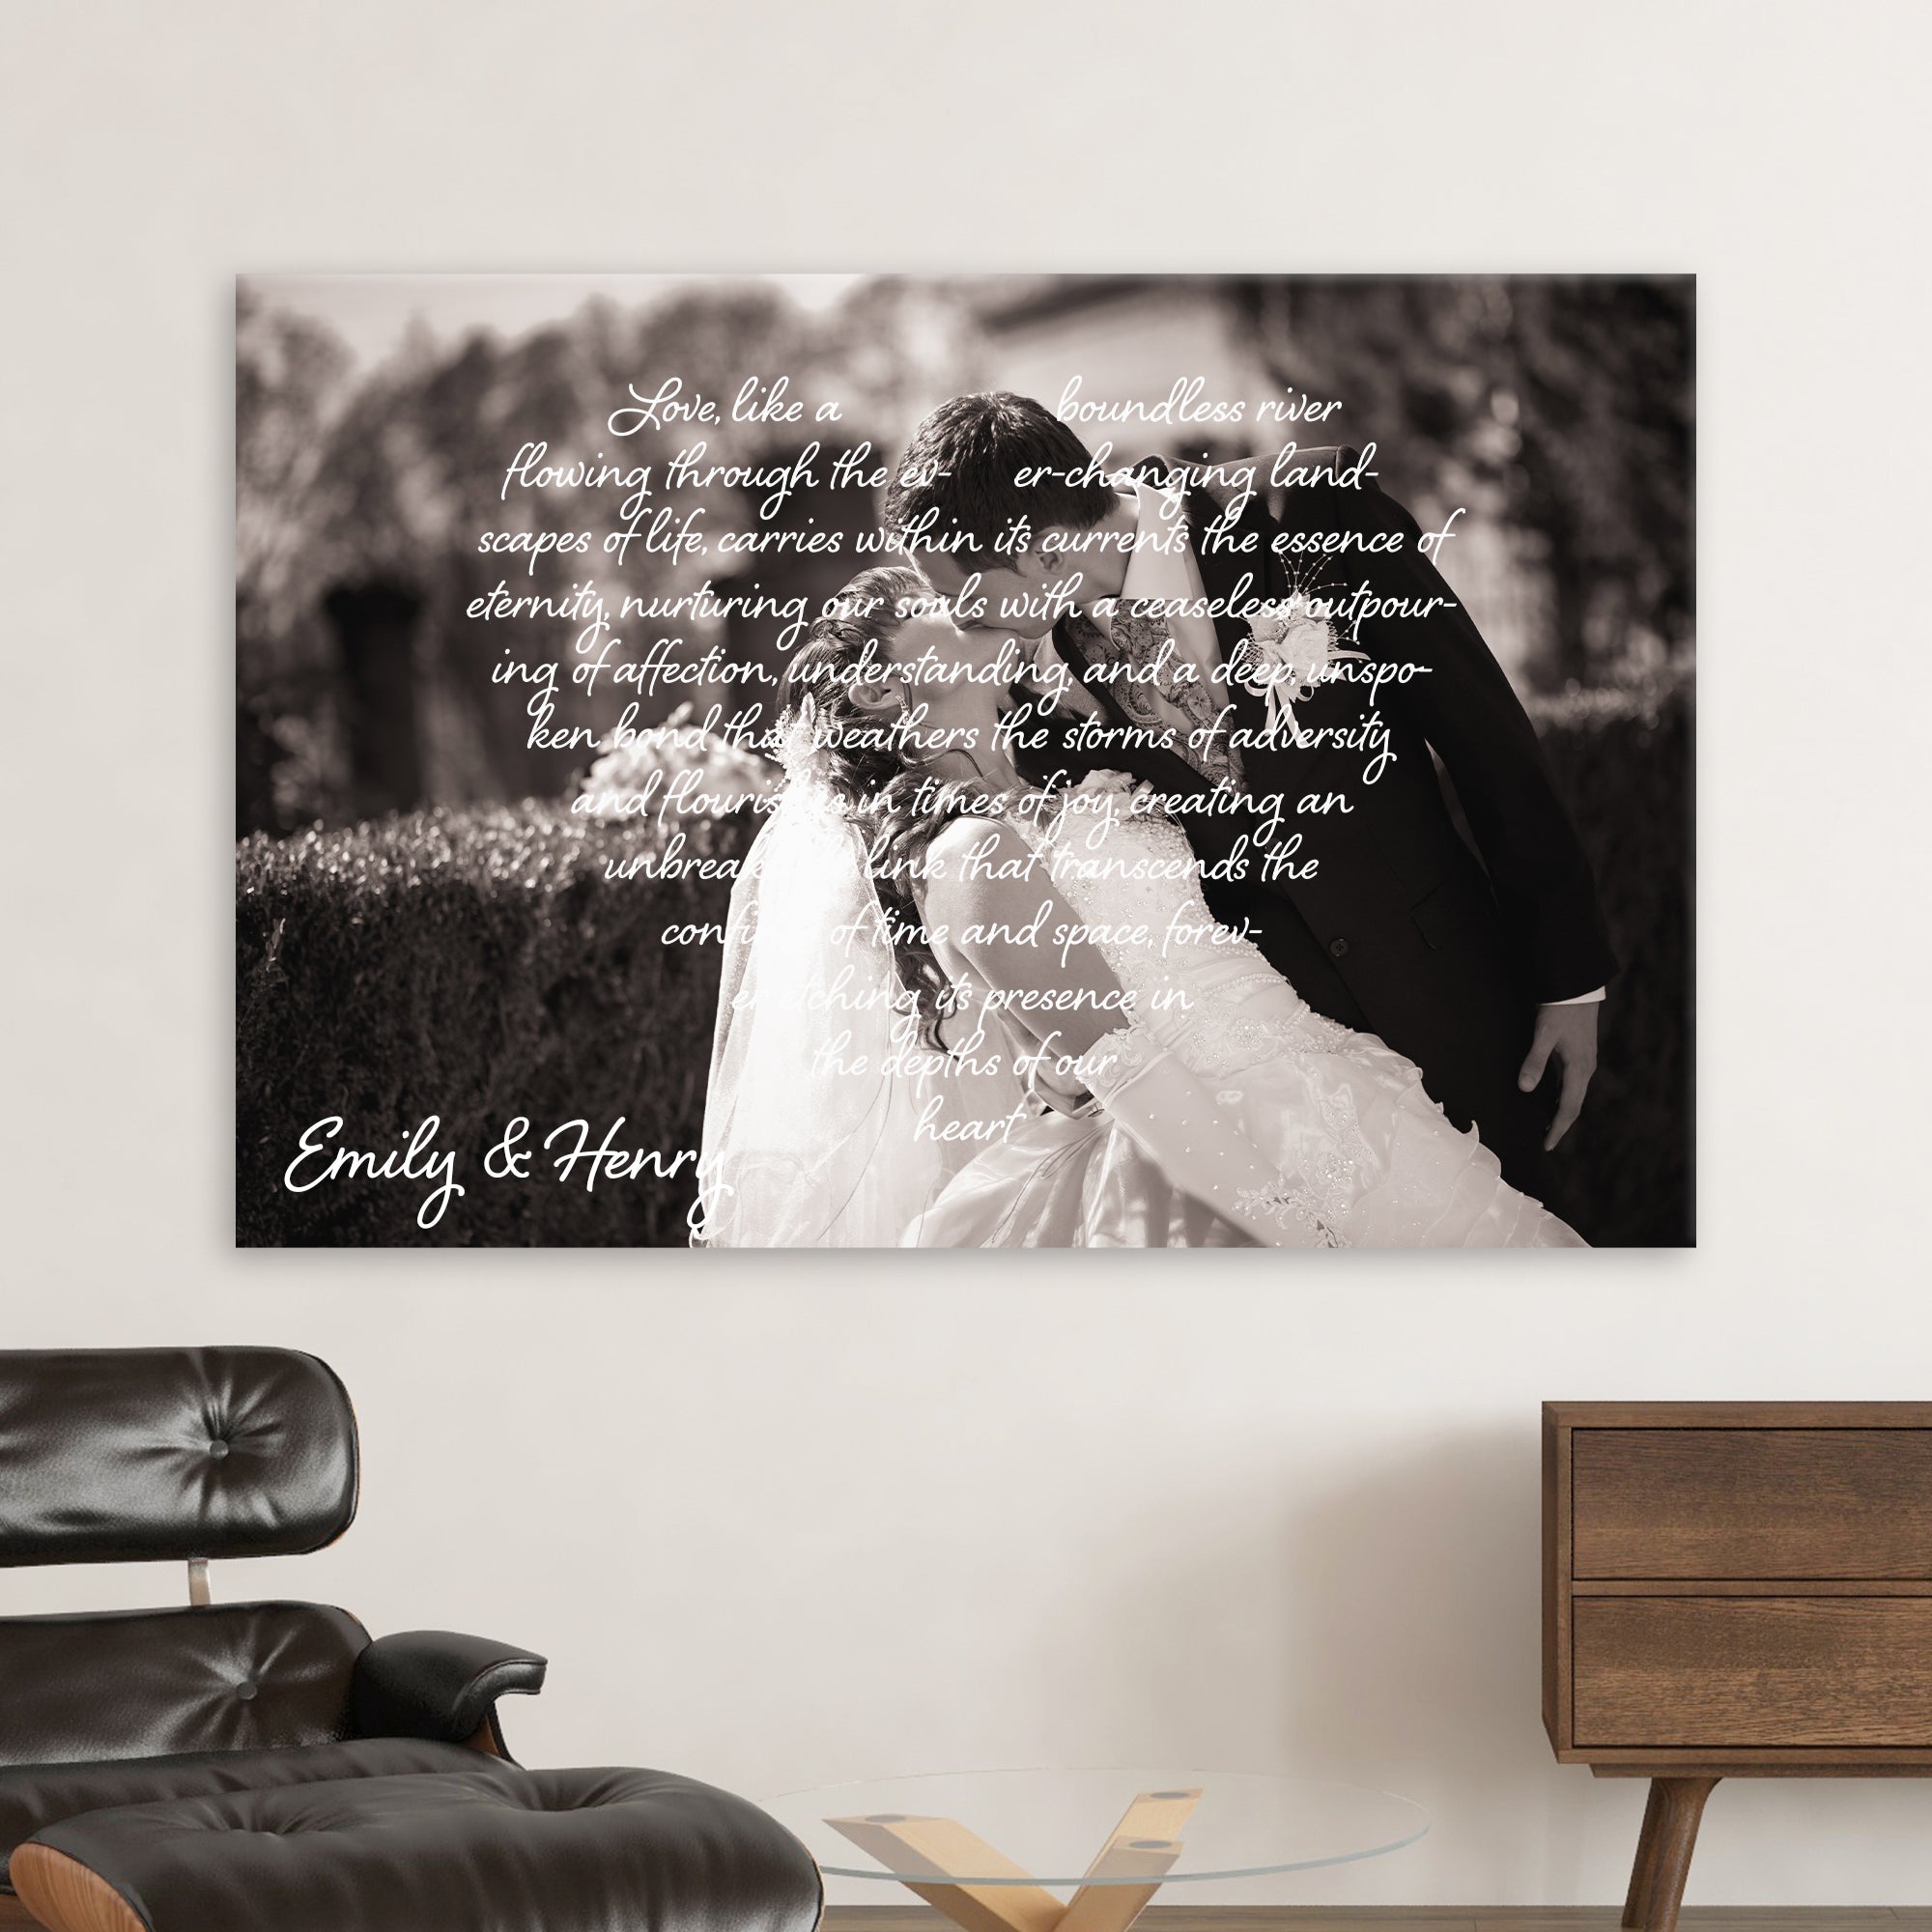 Our Love Last Forever Wedding Personalized Canvas